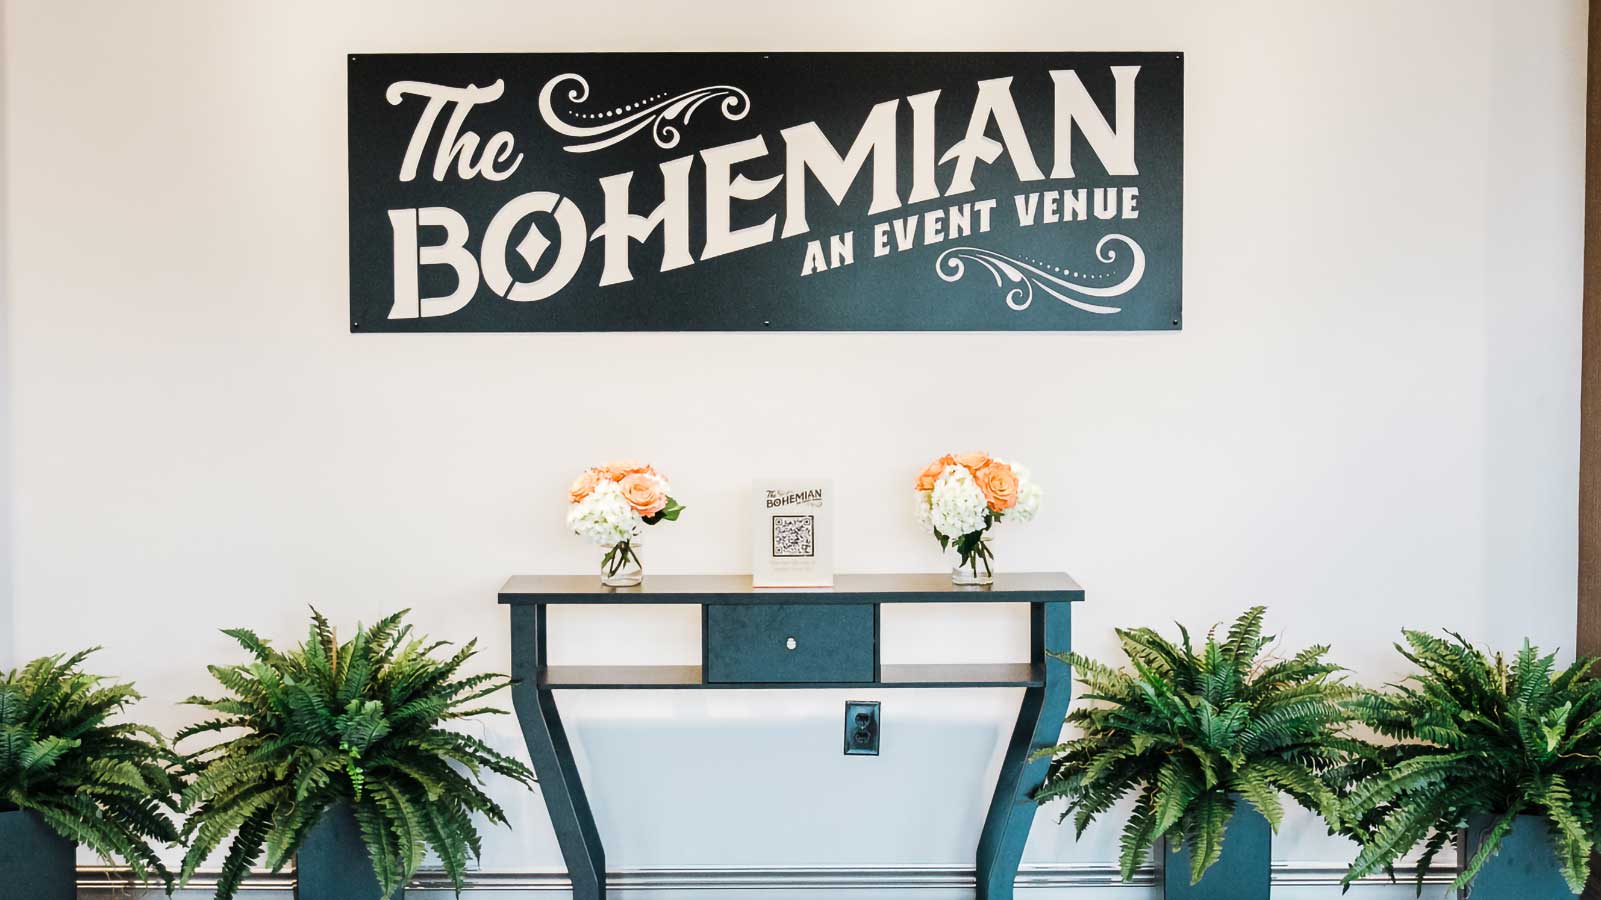 The Bohemian Event Venue Opens In Downtown OWA